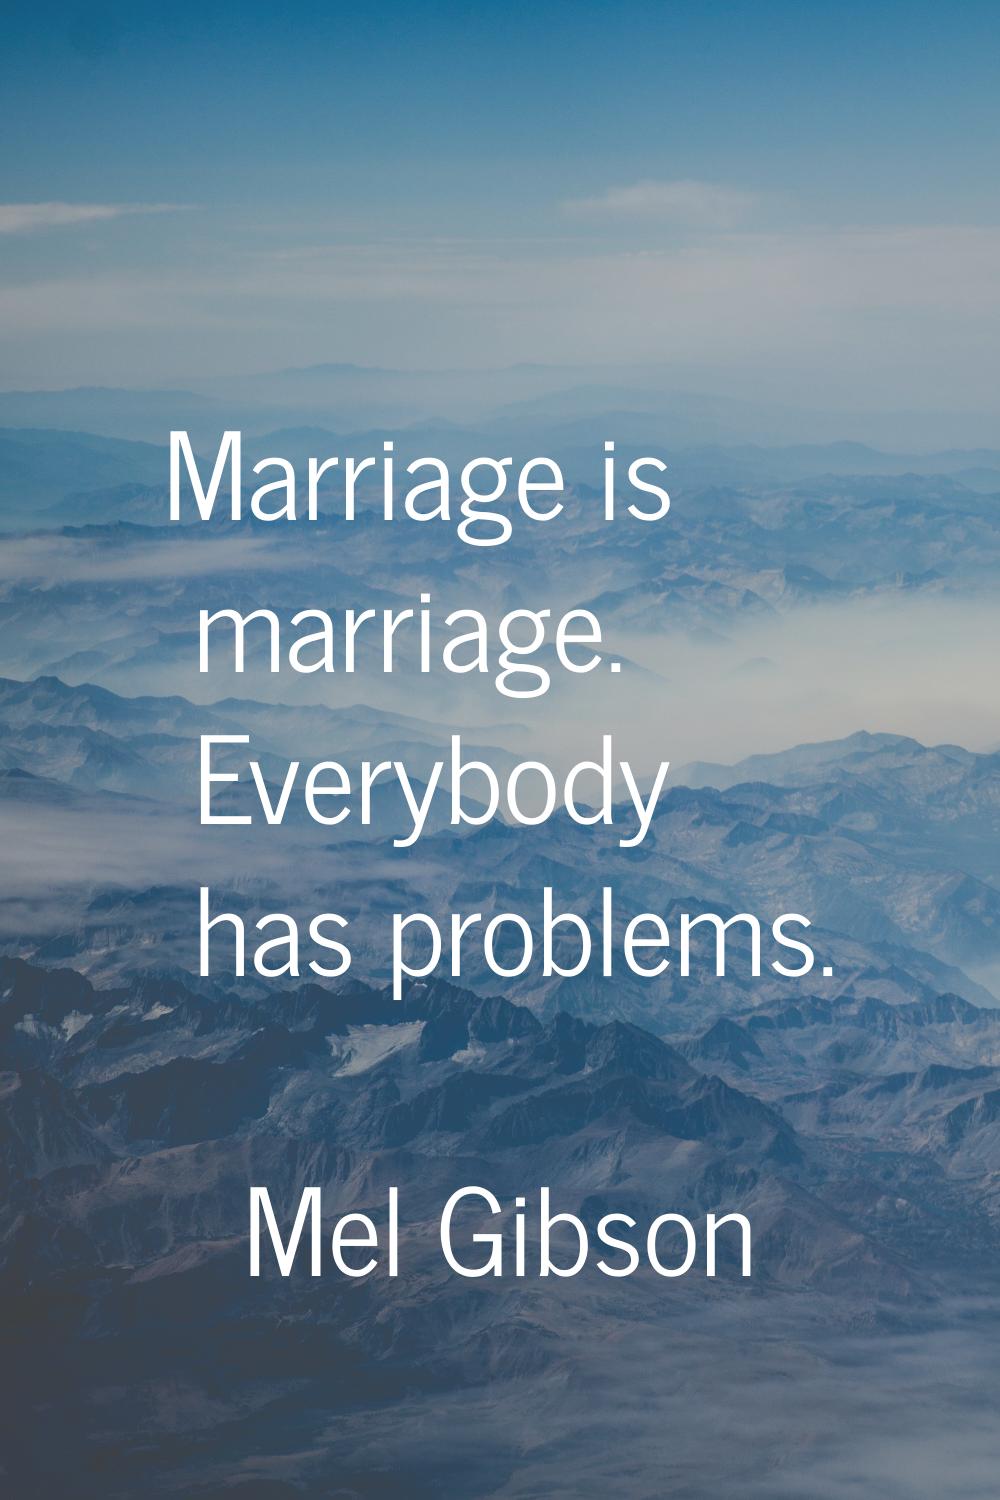 Marriage is marriage. Everybody has problems.